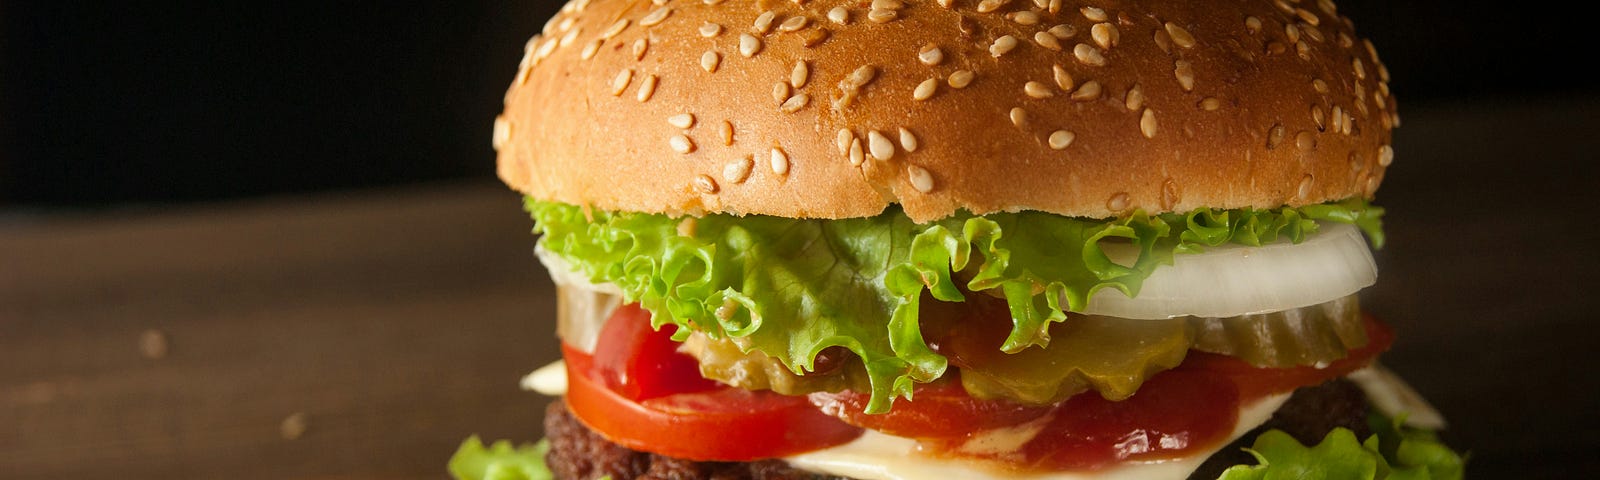 A large hamburger on a wooden table with pepper and sesame.